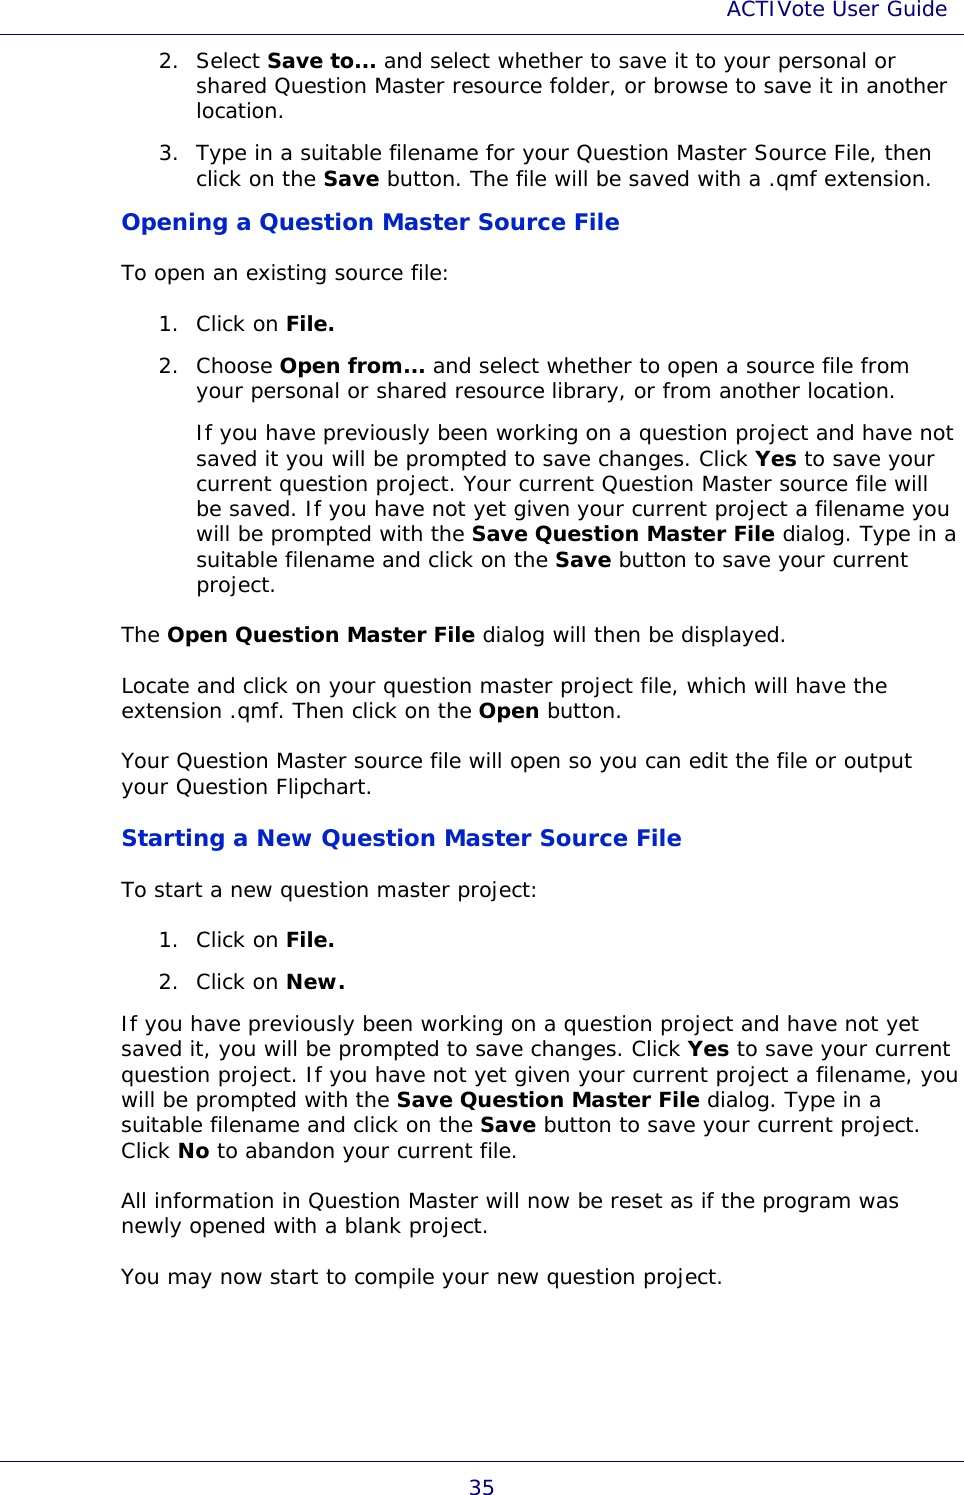 ACTIVote User Guide 35 2. Select Save to... and select whether to save it to your personal or shared Question Master resource folder, or browse to save it in another location. 3. Type in a suitable filename for your Question Master Source File, then click on the Save button. The file will be saved with a .qmf extension. Opening a Question Master Source File To open an existing source file: 1. Click on File. 2. Choose Open from... and select whether to open a source file from your personal or shared resource library, or from another location. If you have previously been working on a question project and have not saved it you will be prompted to save changes. Click Yes to save your current question project. Your current Question Master source file will be saved. If you have not yet given your current project a filename you will be prompted with the Save Question Master File dialog. Type in a suitable filename and click on the Save button to save your current project. The Open Question Master File dialog will then be displayed. Locate and click on your question master project file, which will have the extension .qmf. Then click on the Open button. Your Question Master source file will open so you can edit the file or output your Question Flipchart. Starting a New Question Master Source File To start a new question master project: 1. Click on File. 2. Click on New. If you have previously been working on a question project and have not yet saved it, you will be prompted to save changes. Click Yes to save your current question project. If you have not yet given your current project a filename, you will be prompted with the Save Question Master File dialog. Type in a suitable filename and click on the Save button to save your current project. Click No to abandon your current file. All information in Question Master will now be reset as if the program was newly opened with a blank project. You may now start to compile your new question project. 